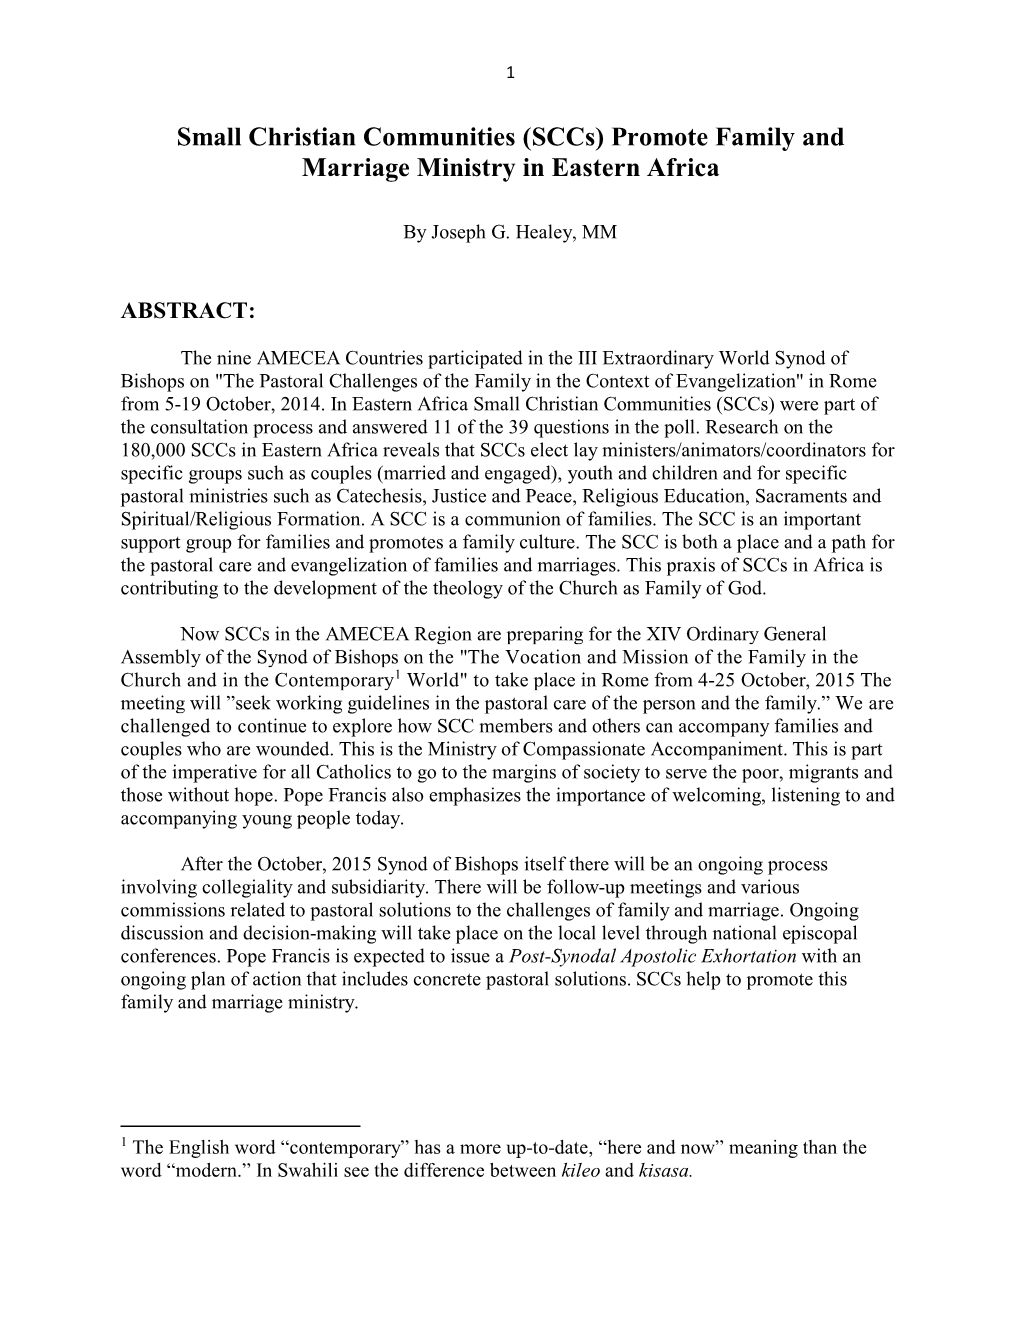 Small Christian Communities (Sccs) Promote Family and Marriage Ministry in Eastern Africa